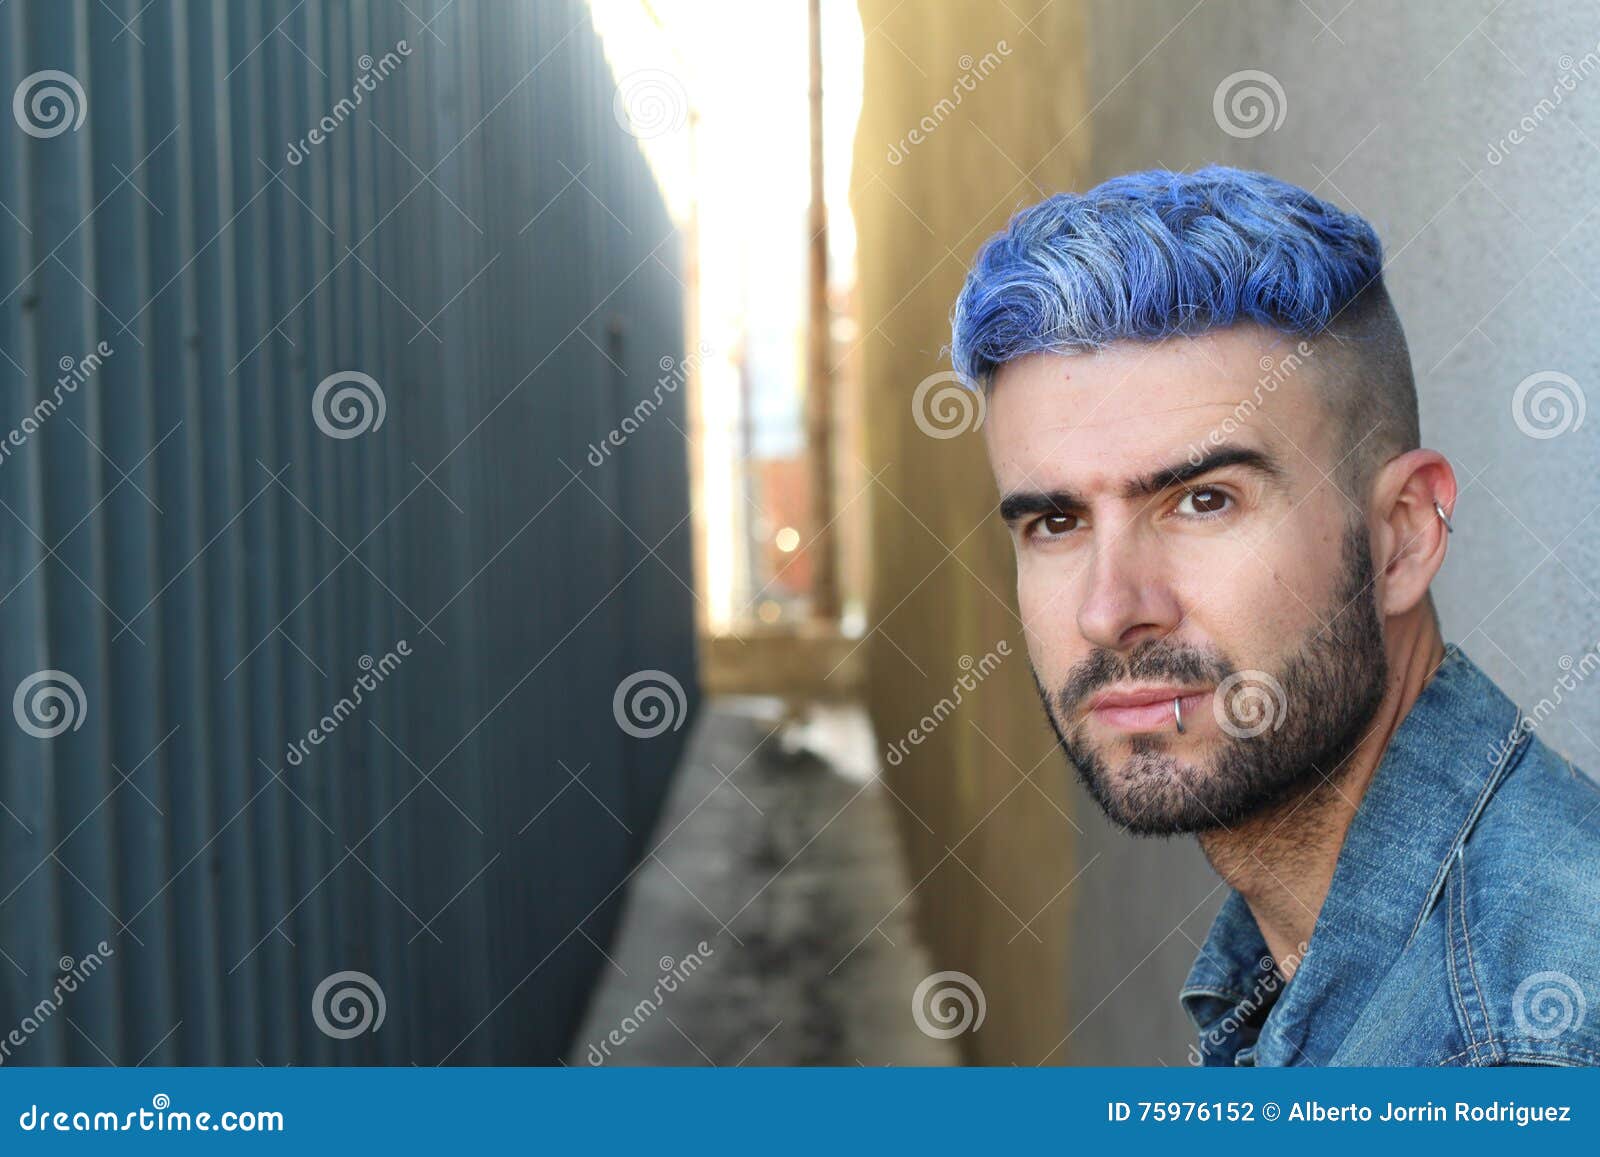 7. Temporary Blue Hair Color for Men - wide 5